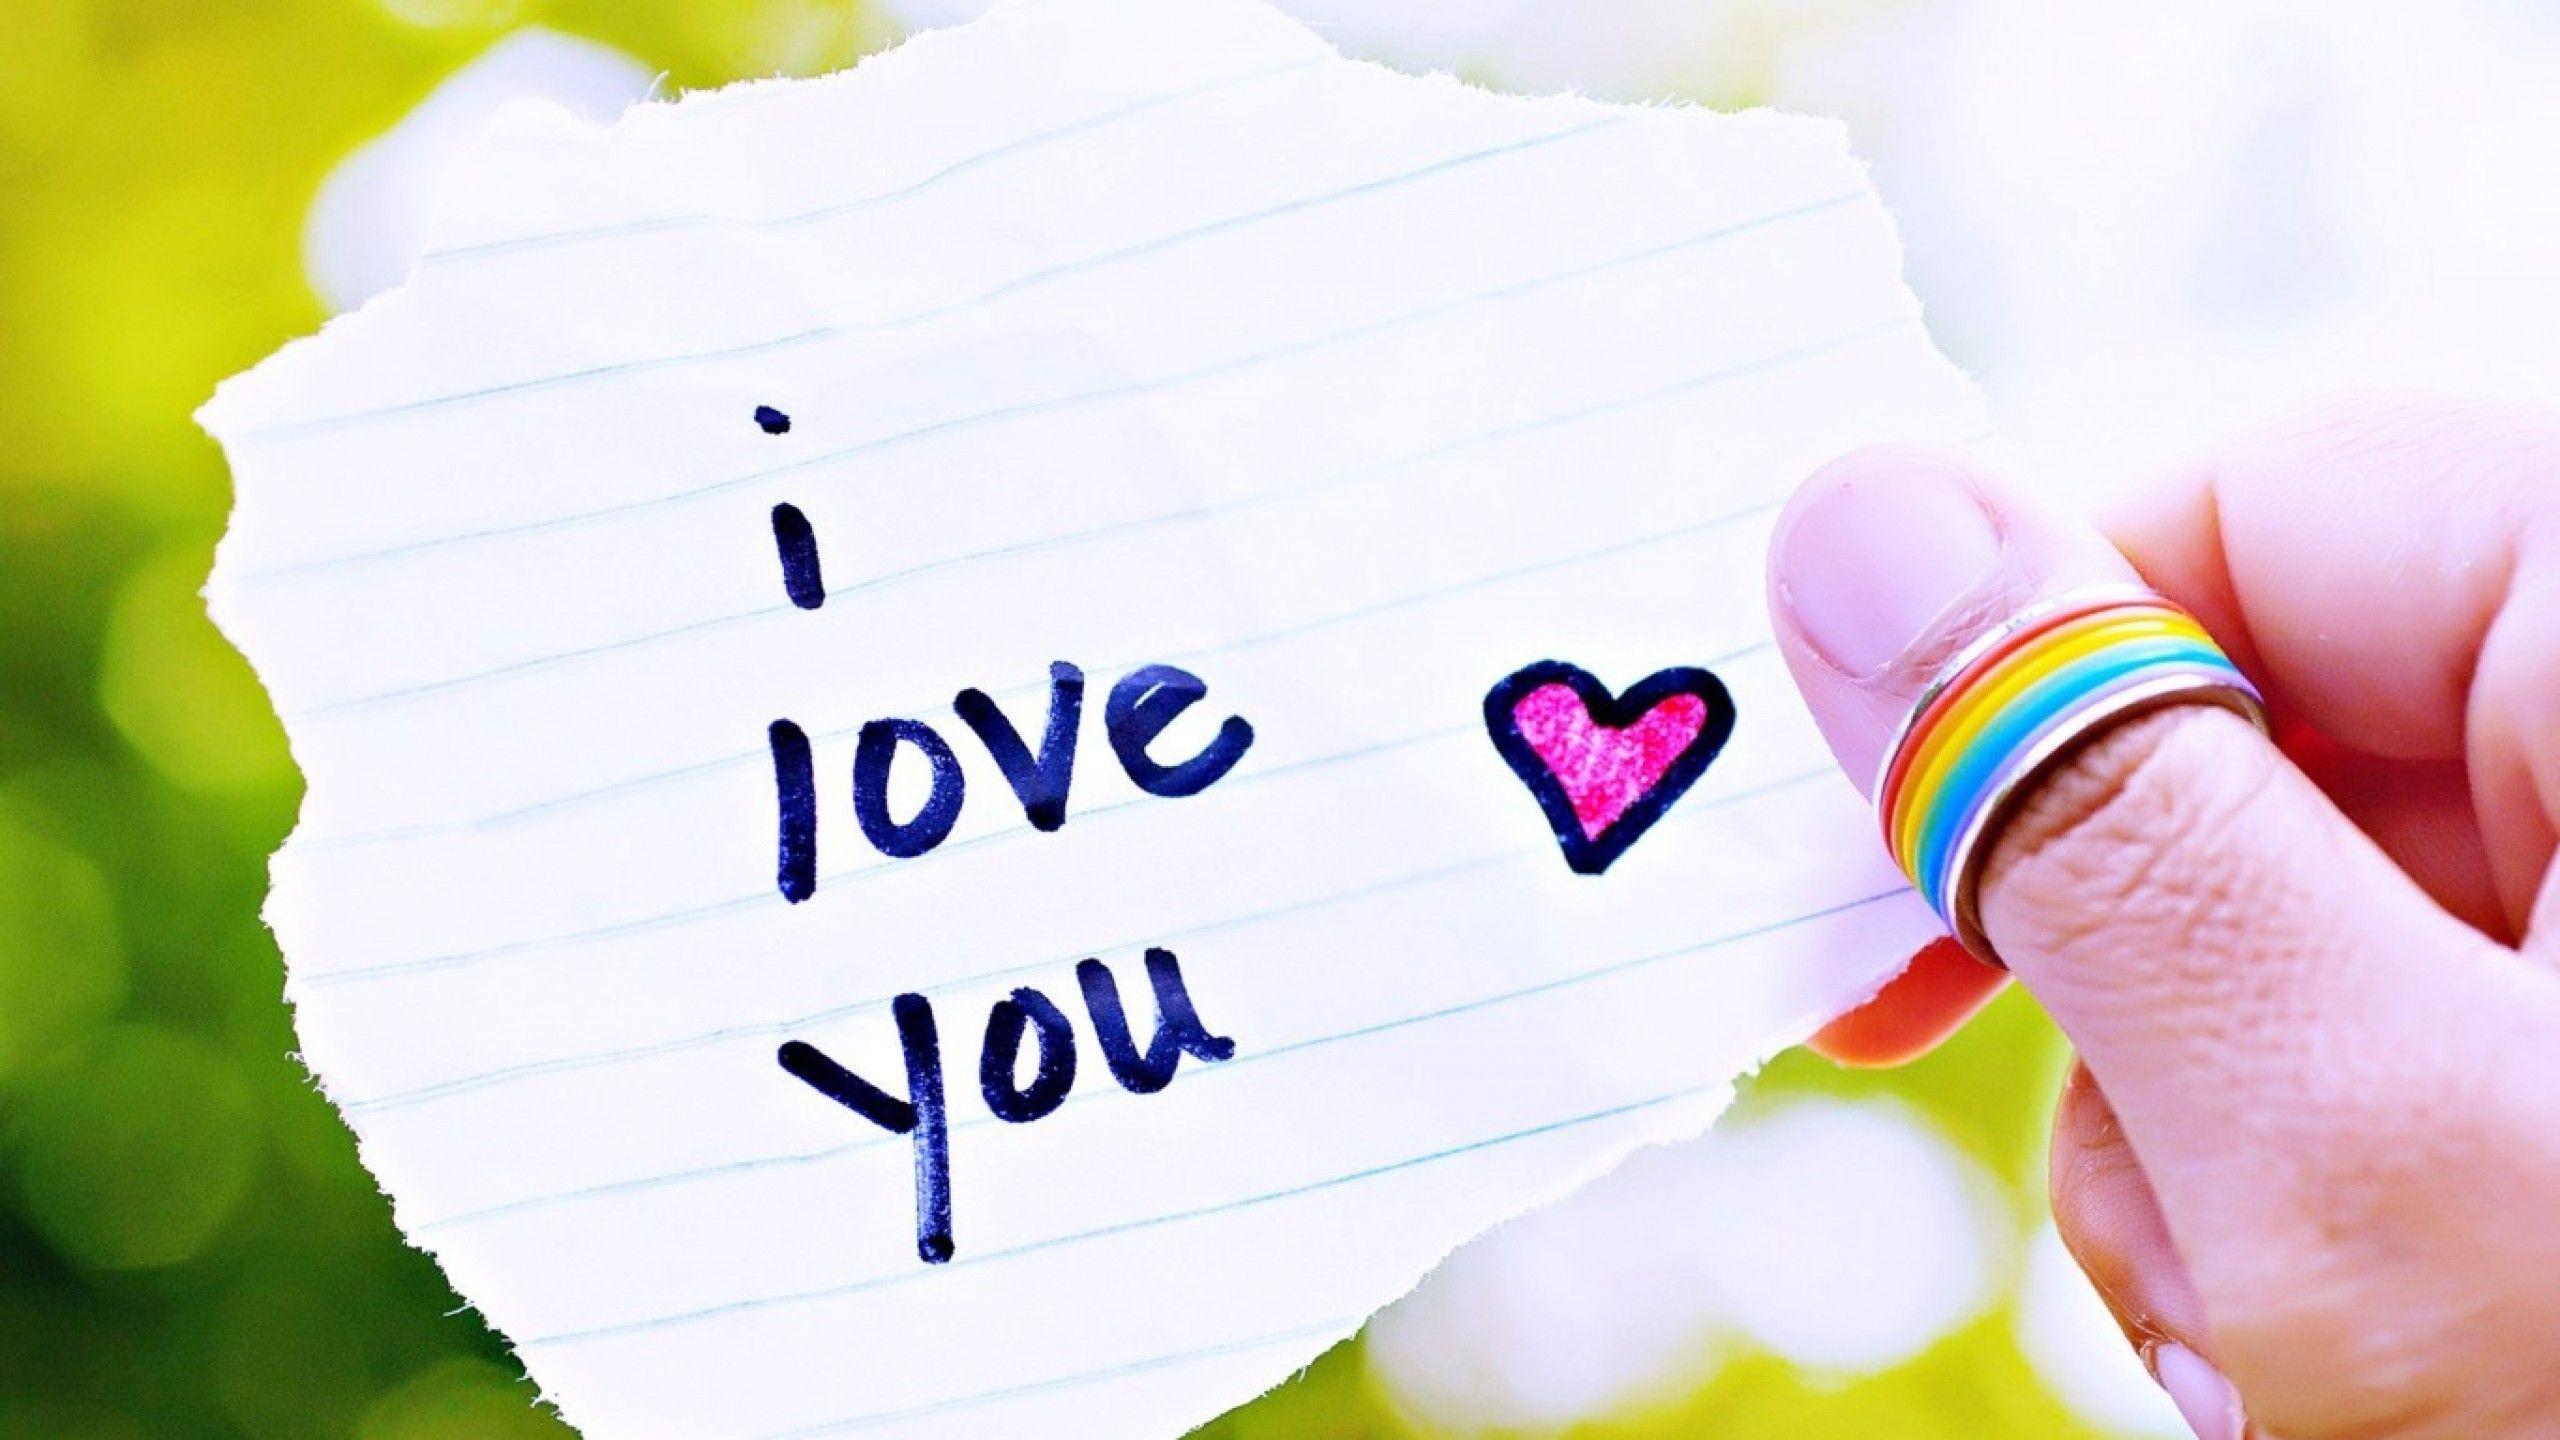 I Love You Wallpapers HD - Wallpaper Cave